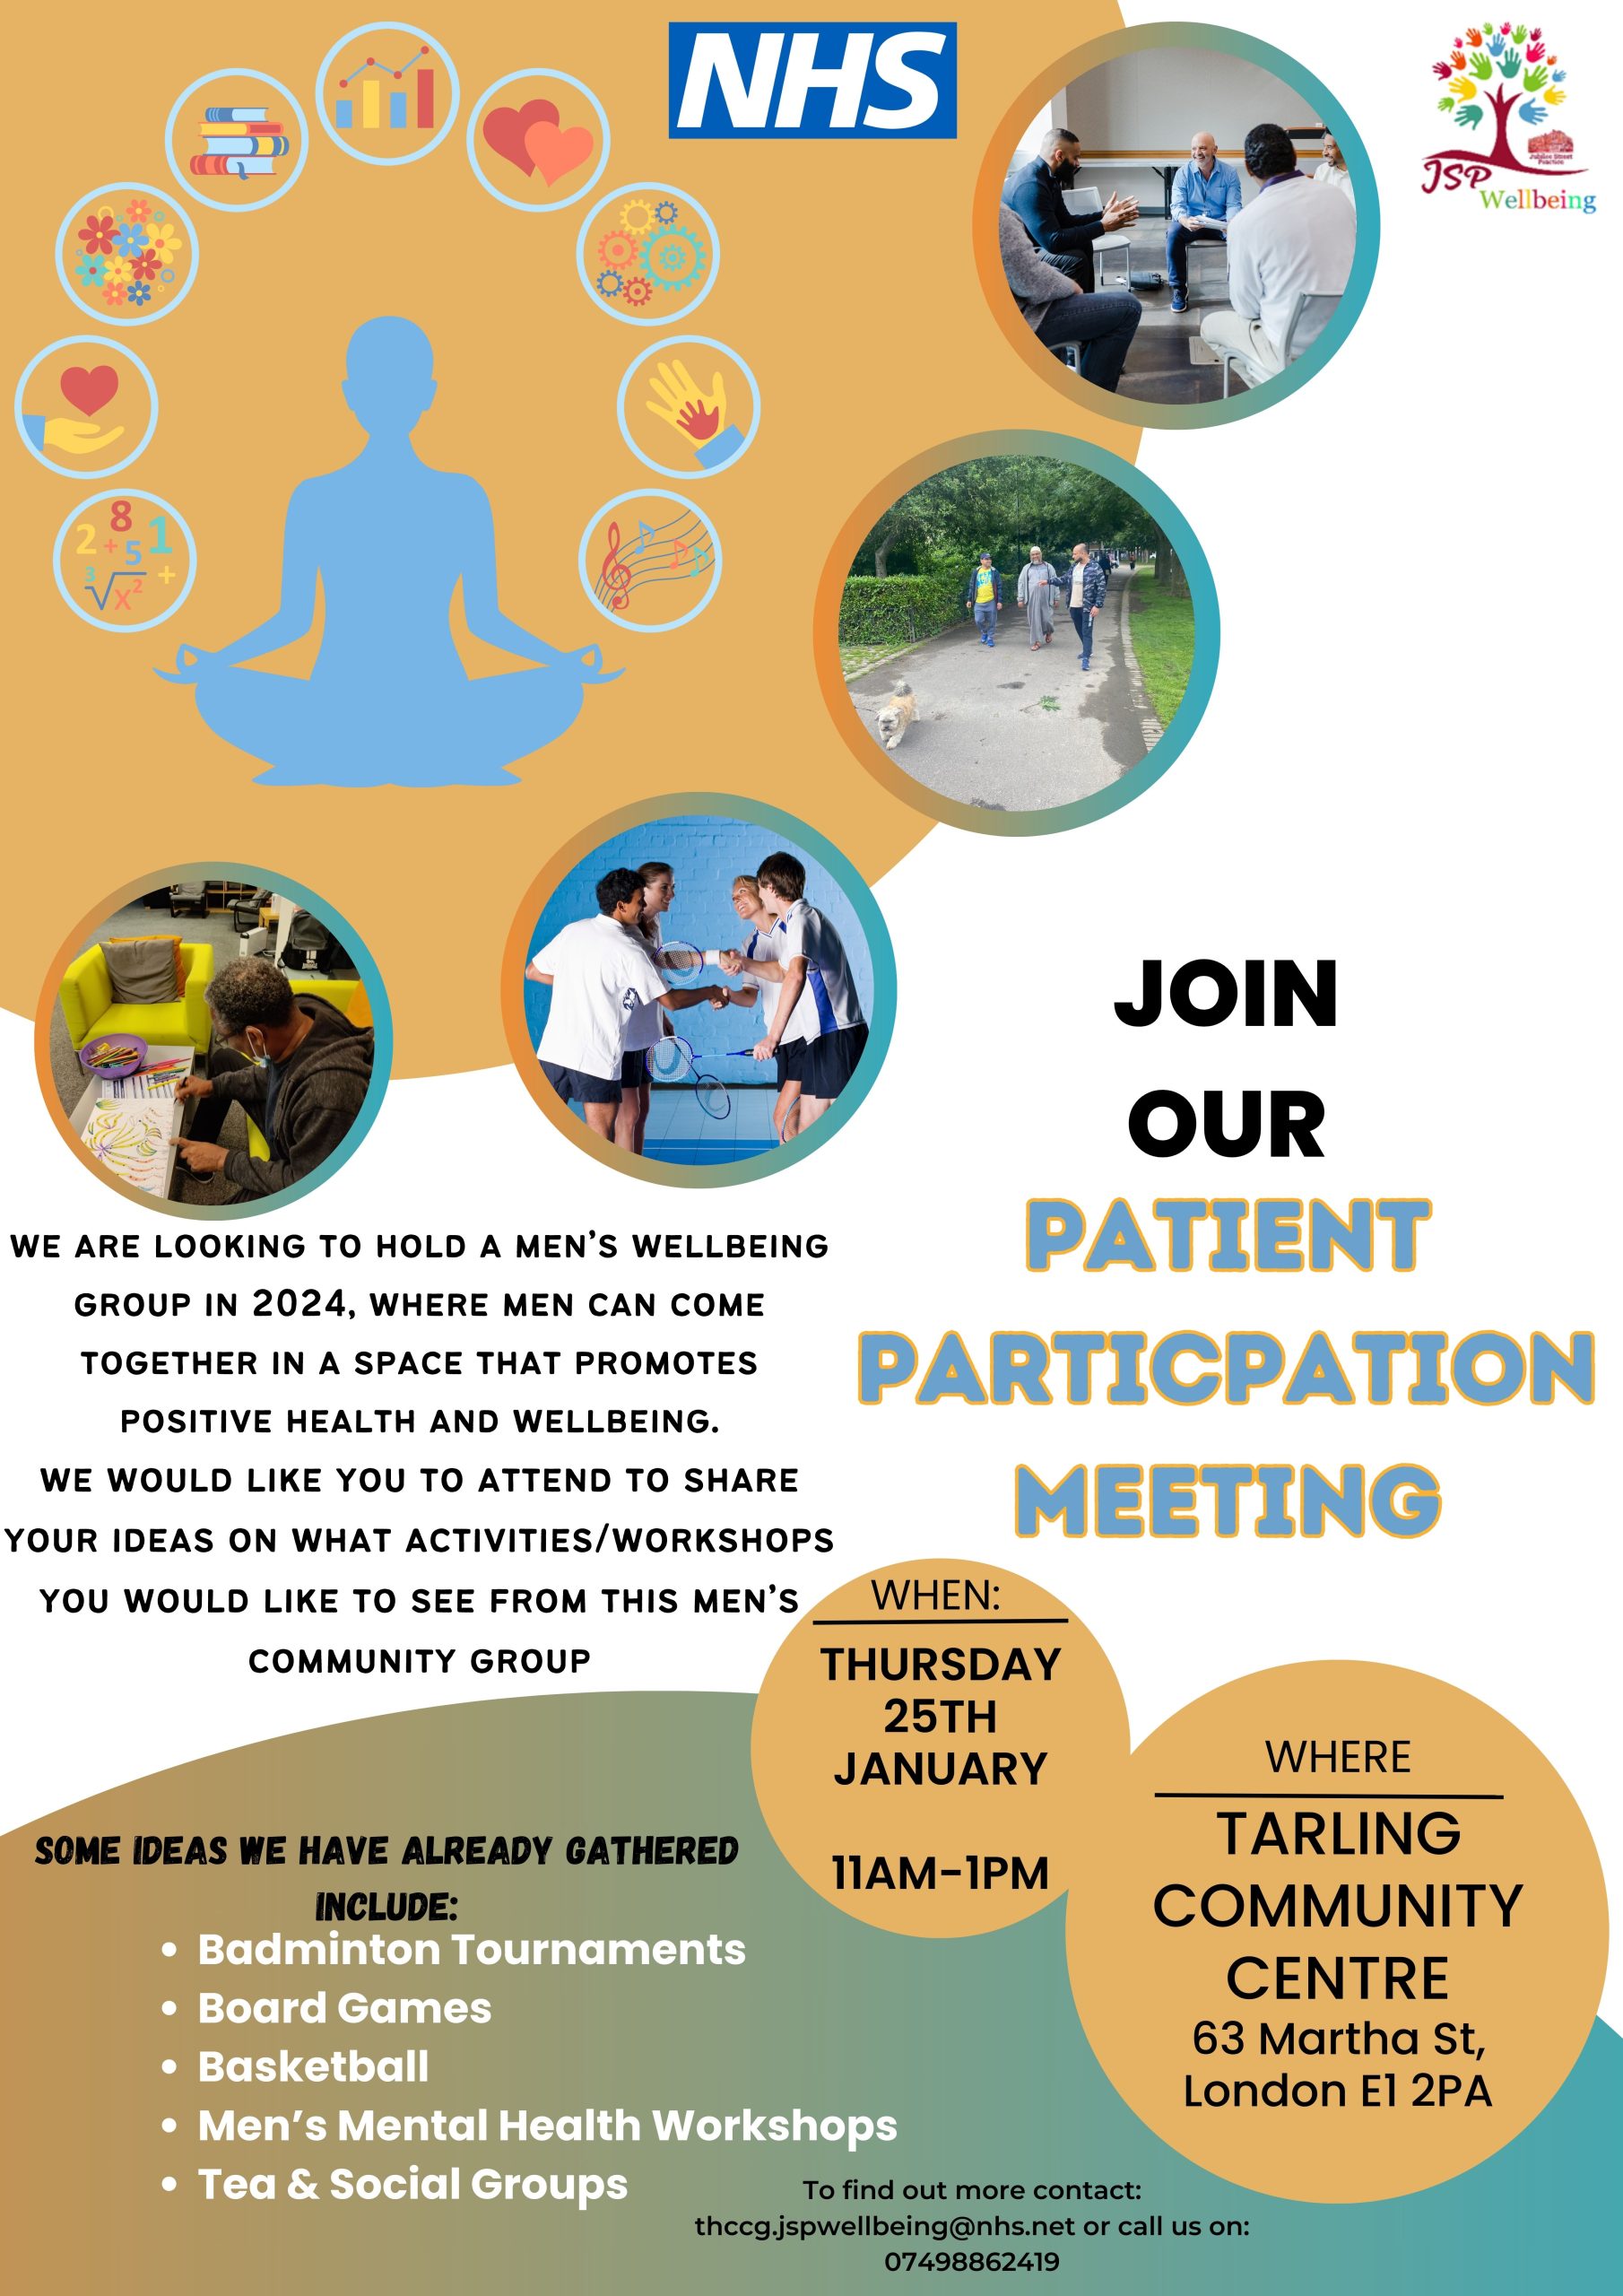 we are looking to hold a men’s wellbeing group in 2024, where men can come together in a space that promotes positive health and wellbeing. we would like you to attend to share your ideas on what activities/workshops you would like to see from this men’s community group 